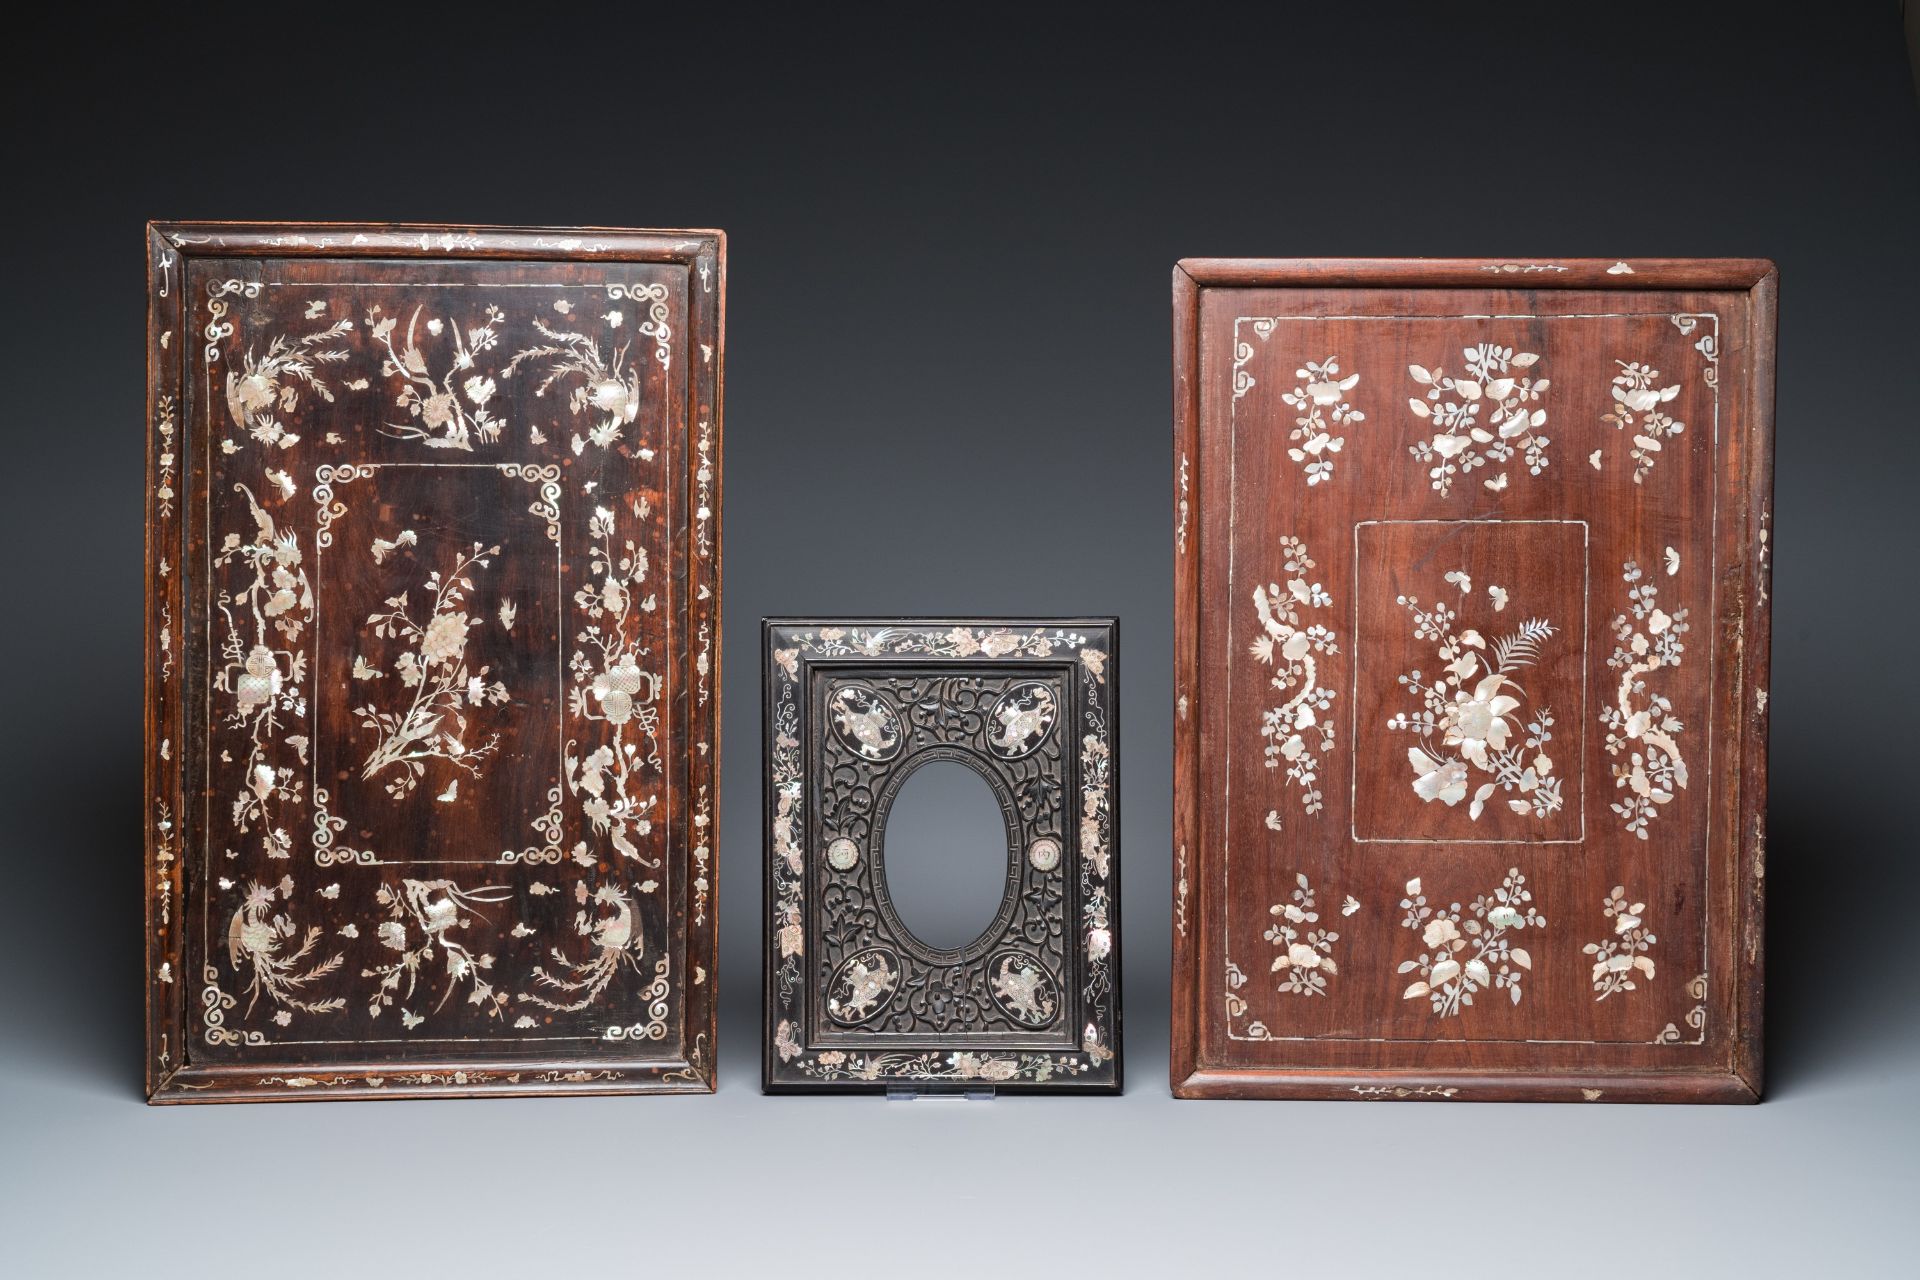 Two mother-of-pearl-inlaid wooden trays, two opium trays and an oval frame, China and/or Vietnam, 19 - Bild 2 aus 9